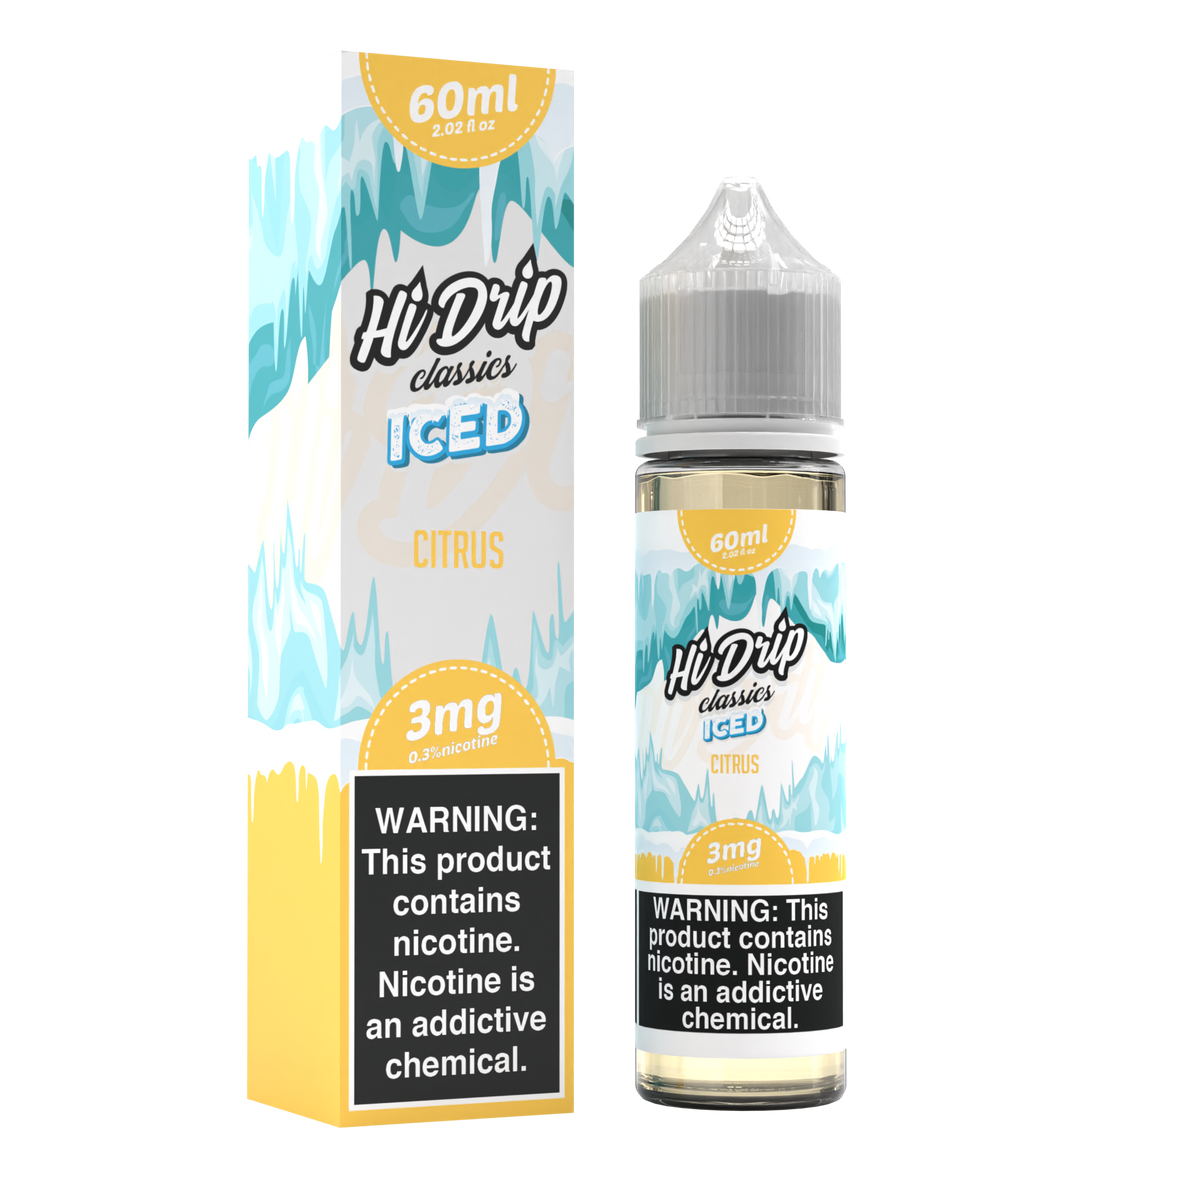 Citrus Iced by Hi-Drip Classics Series 60mL with Packaging